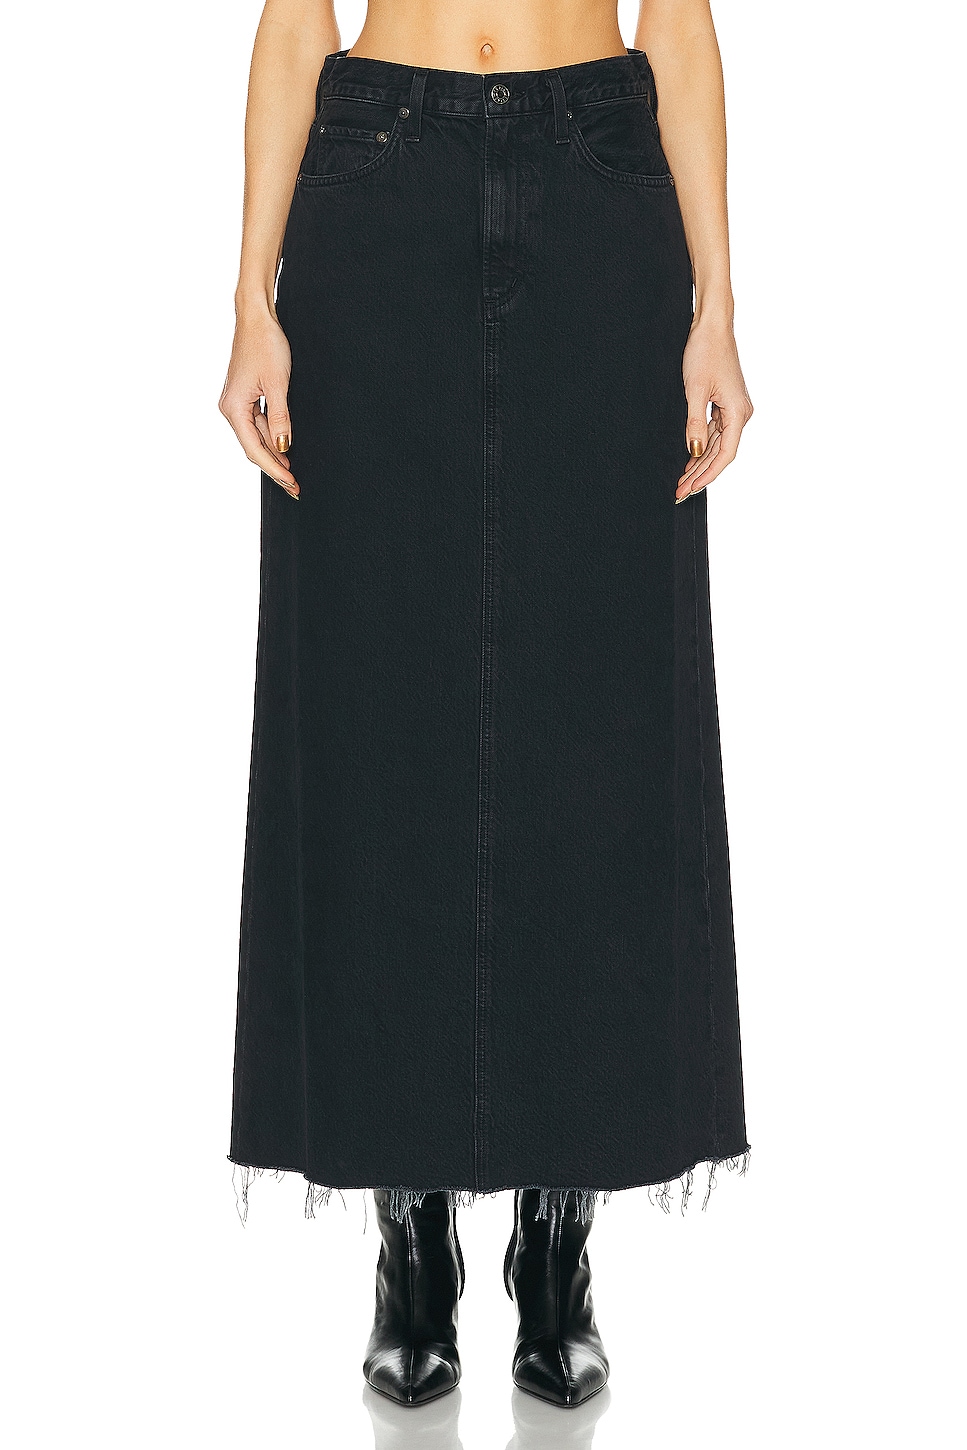 Image 1 of AGOLDE Hilla Long Line Skirt in Remacth